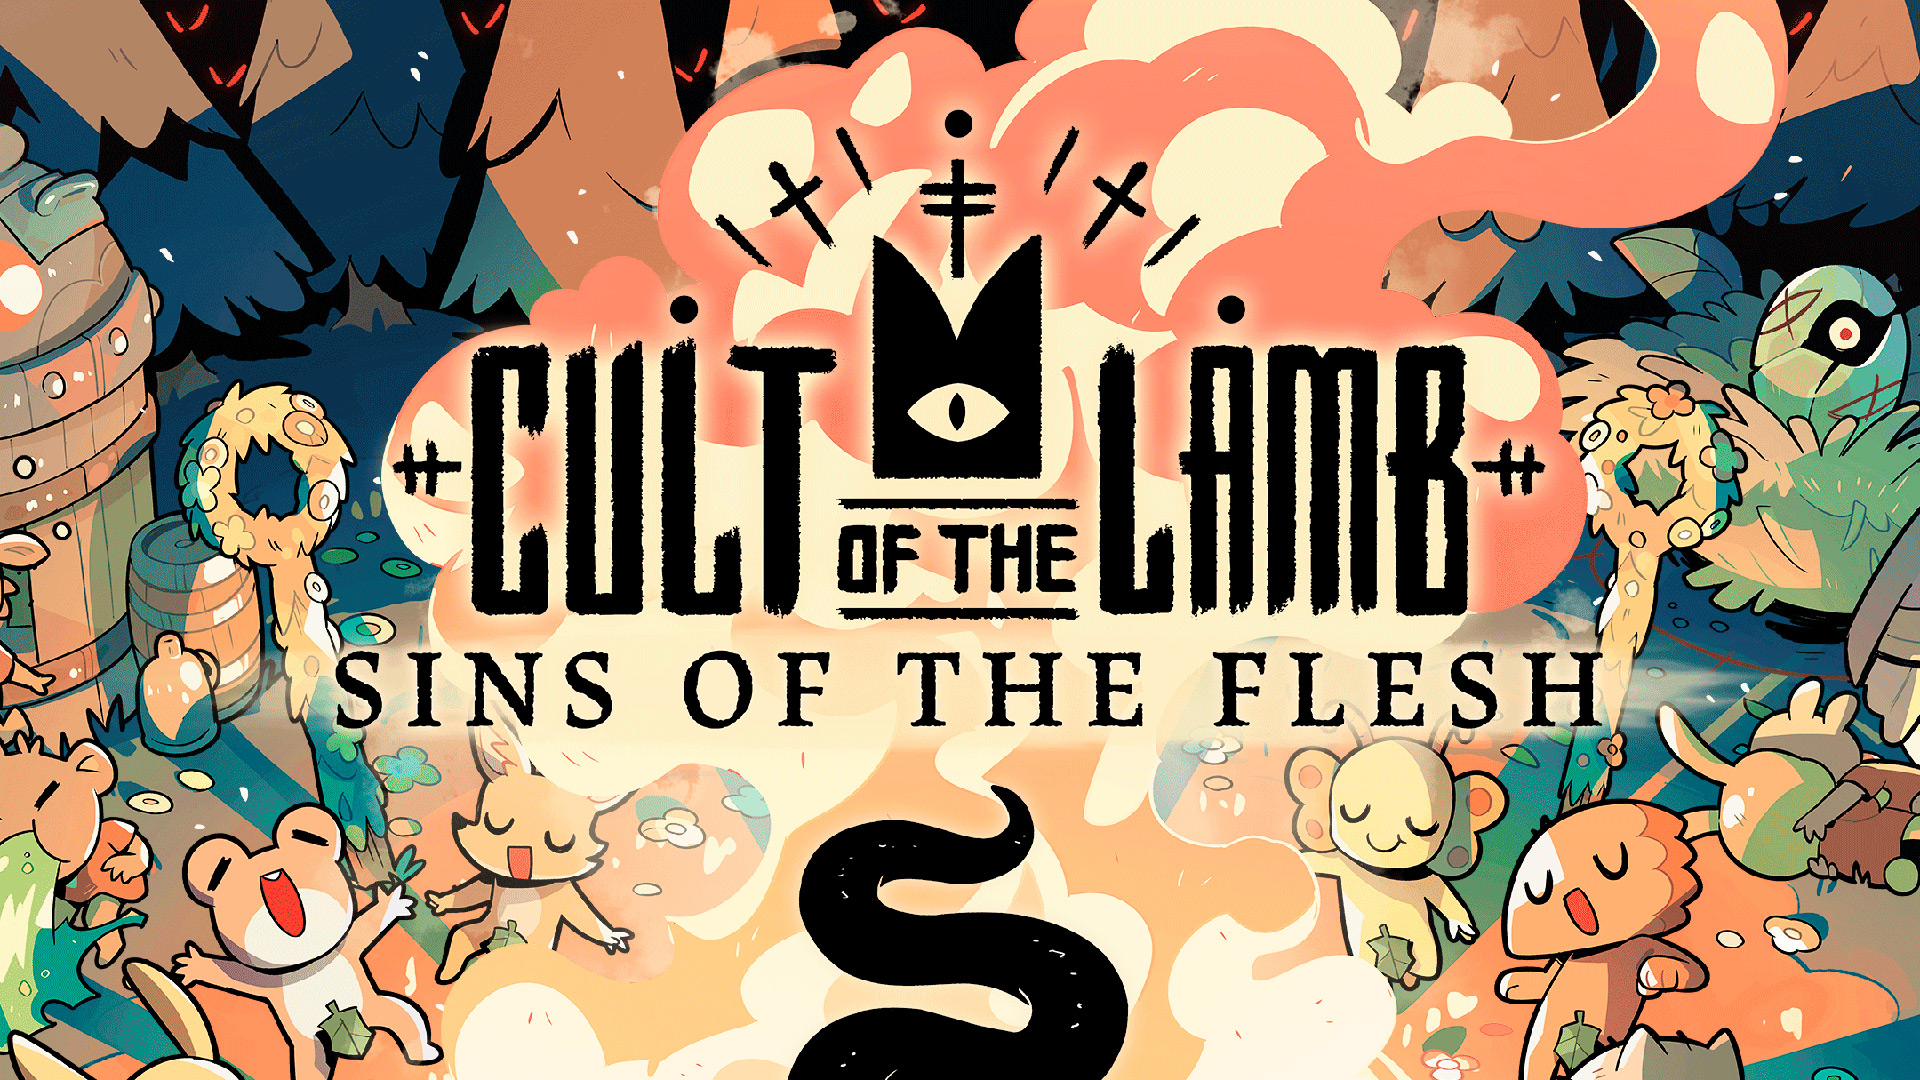 Cult of the Lamb has announced Sins of the Flesh, the game's next major free content update